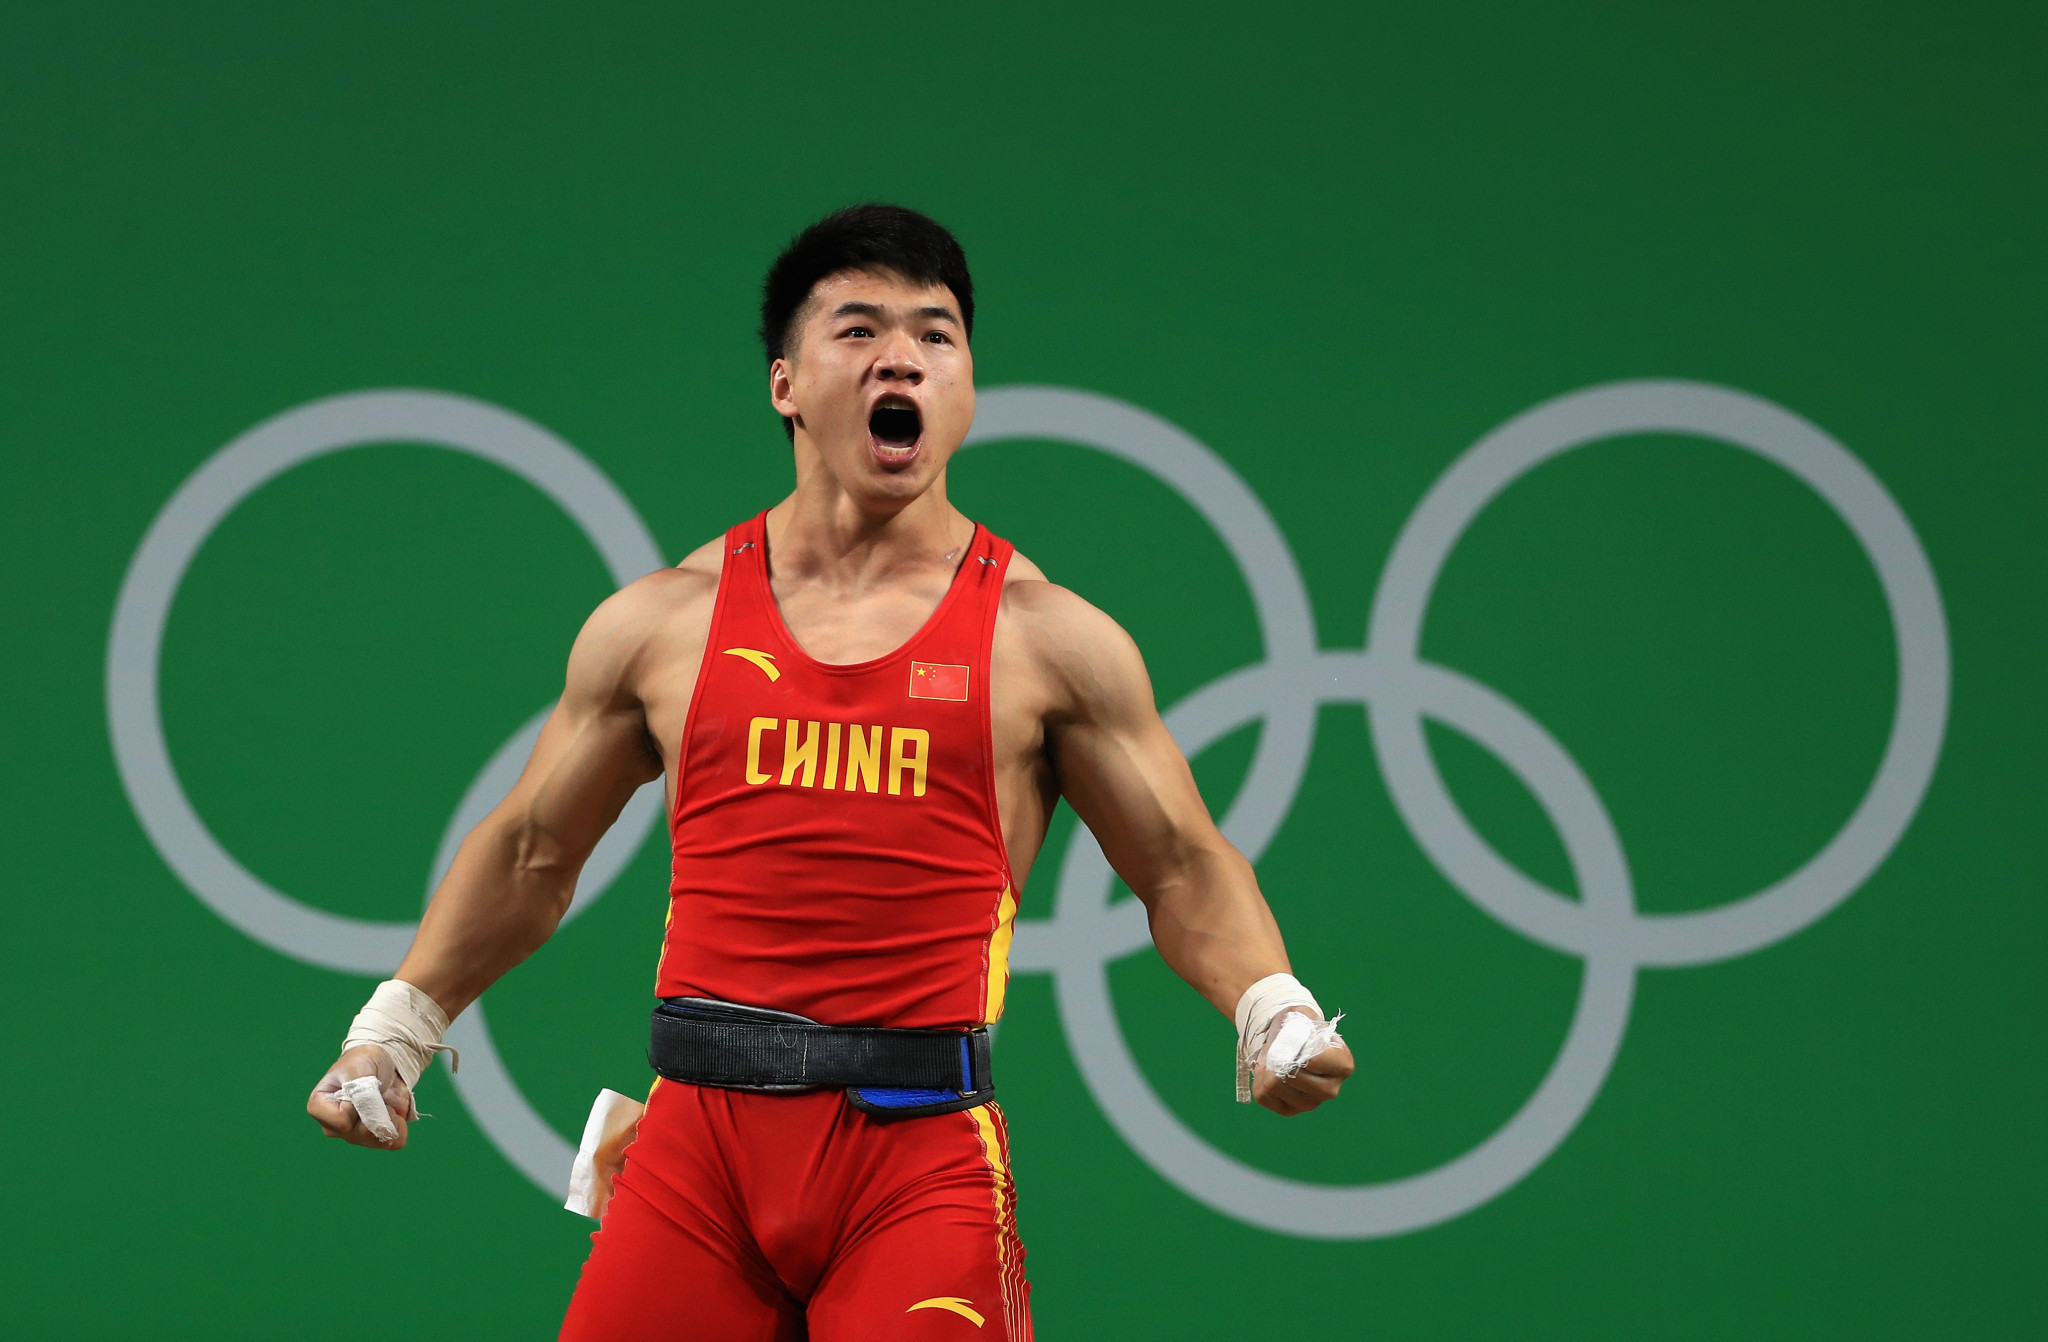 China’s Tian Tao dominated the men’s 96 kilograms event at the Asian Weightlifting Championships to claim a clean sweep of gold medals in front of a home crowd in Ningbo ©Getty Images